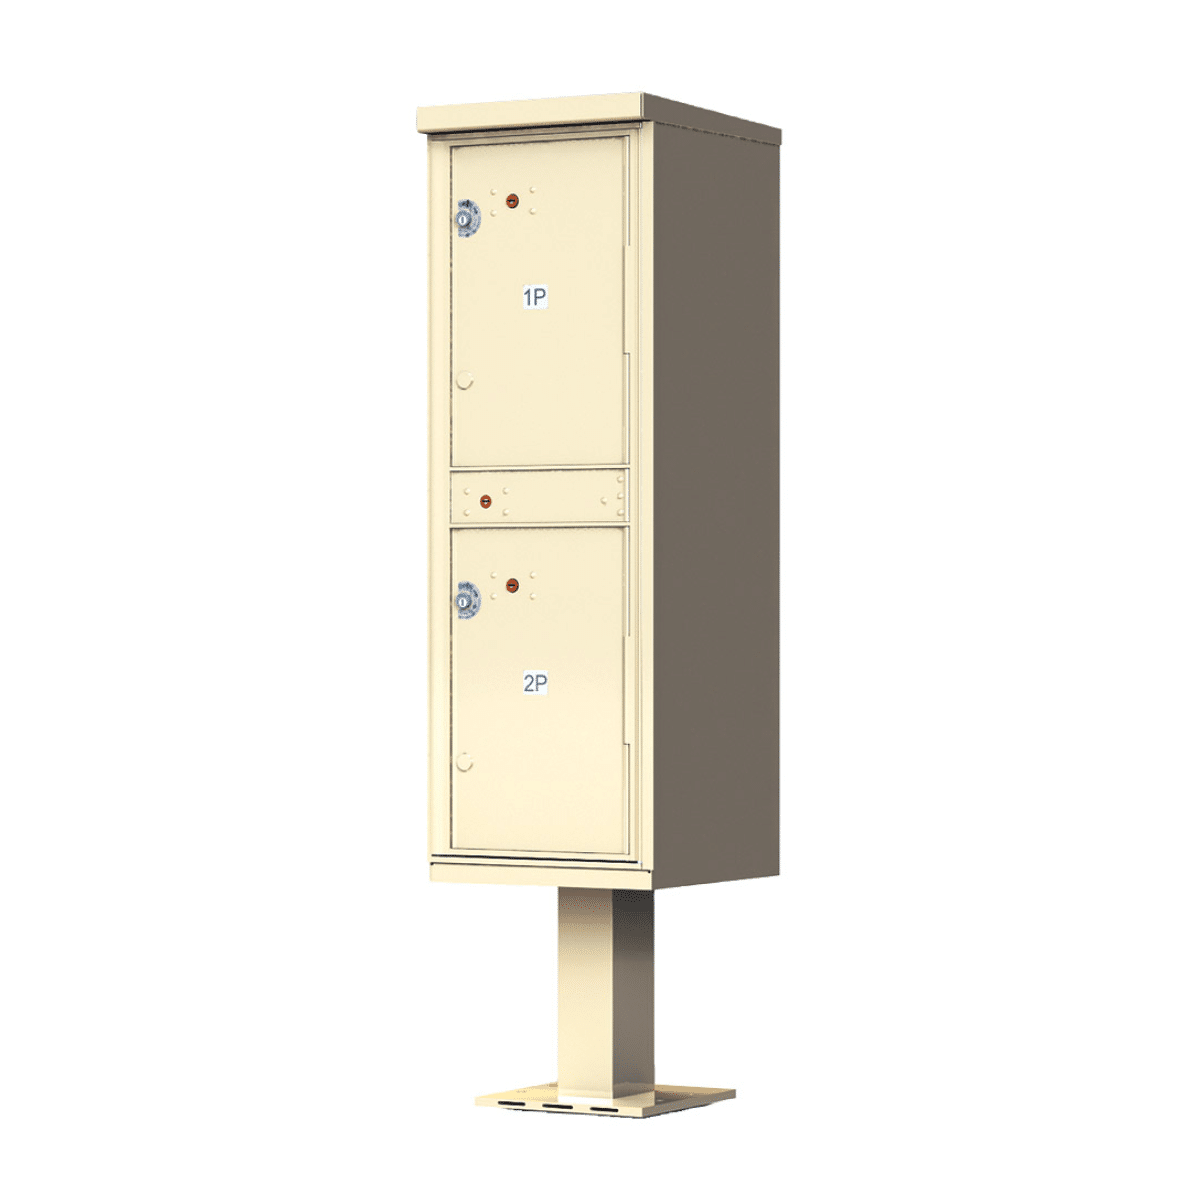 Florence CBU Cluster Mailbox – 2 Parcel Lockers Product Image